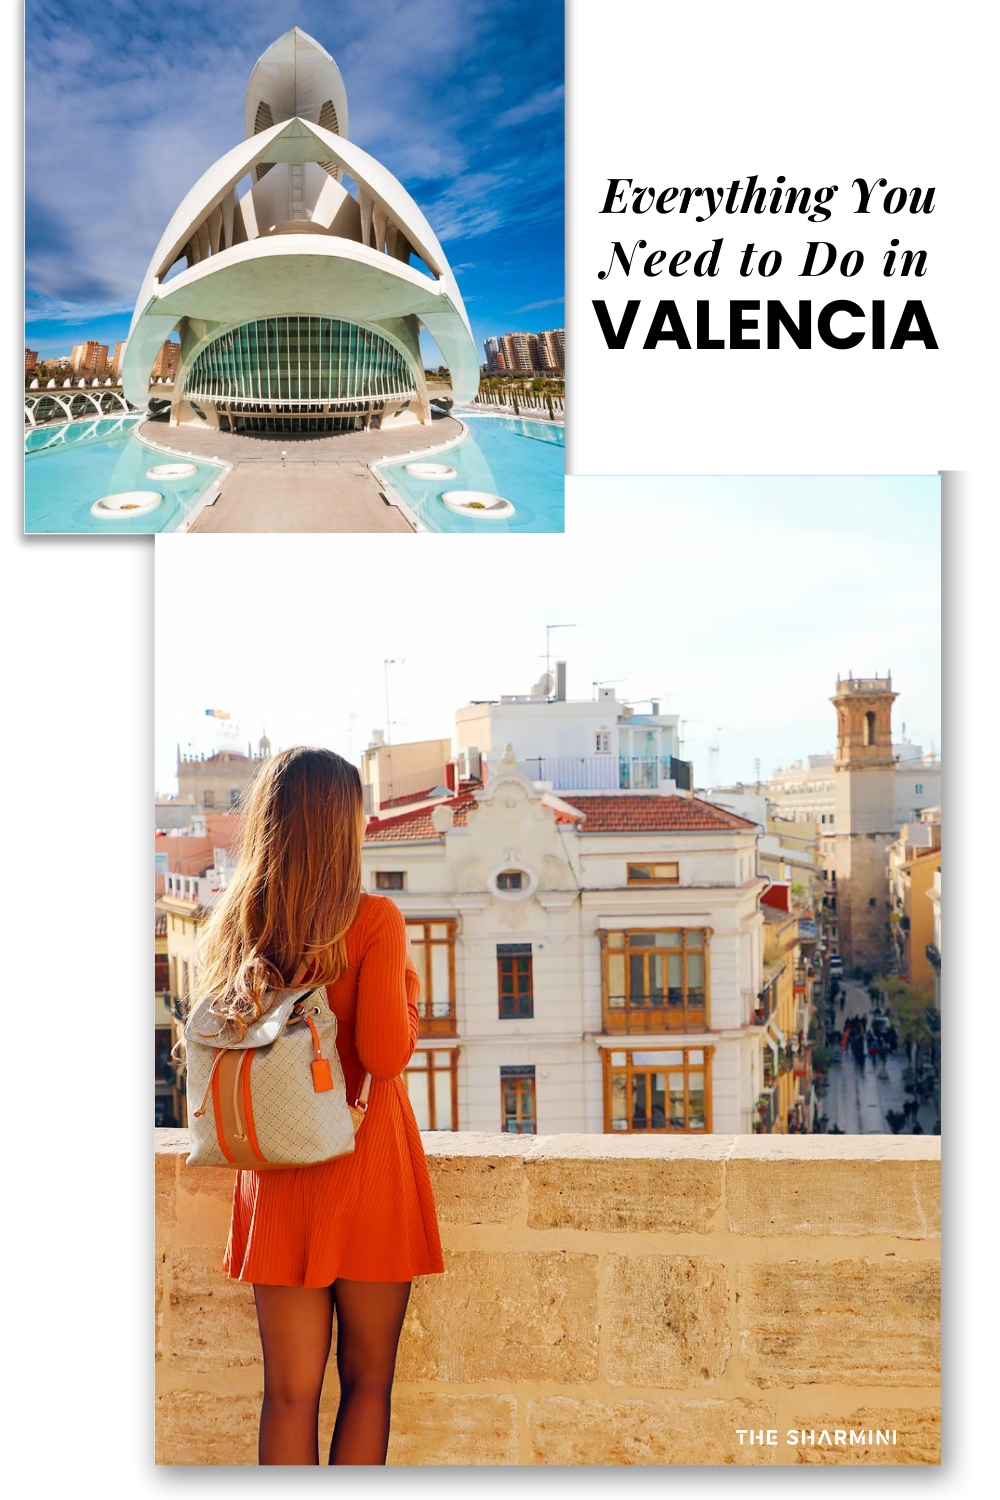 Is Valencia safe for solo female travelers?